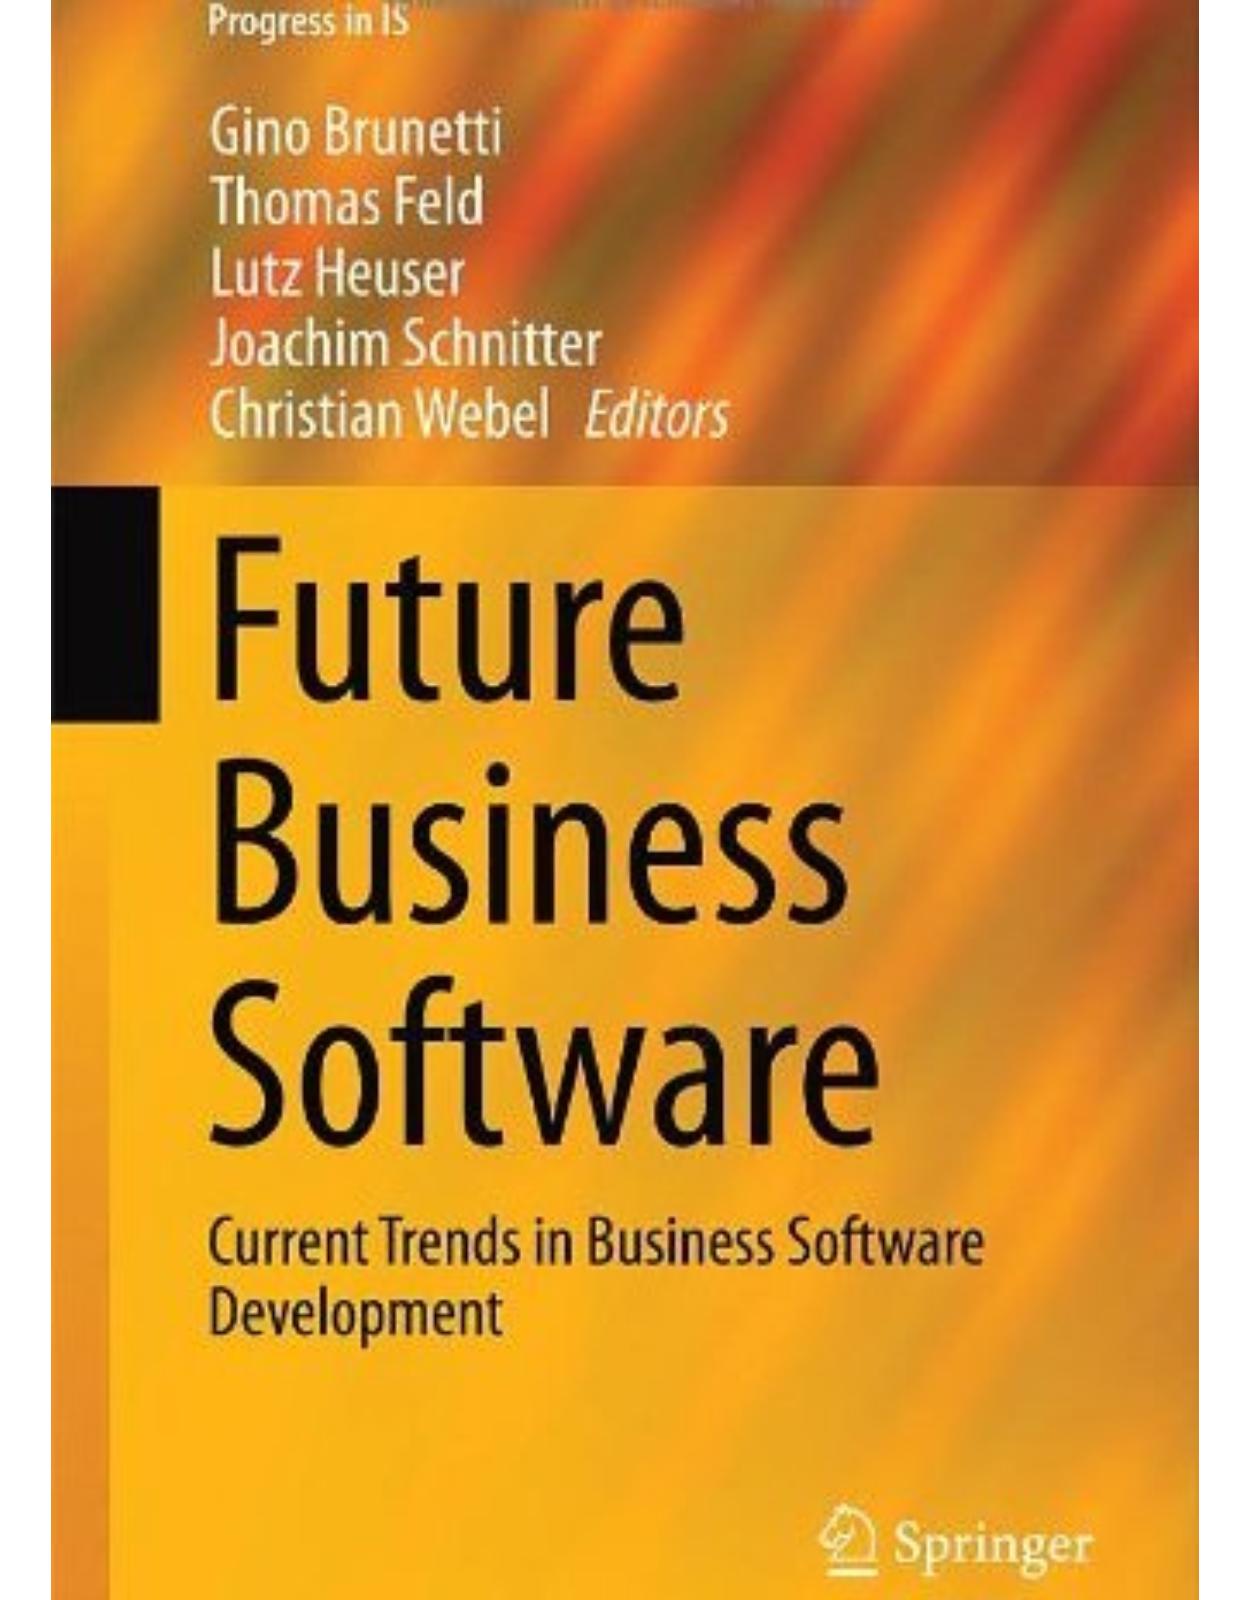 Future Business Software